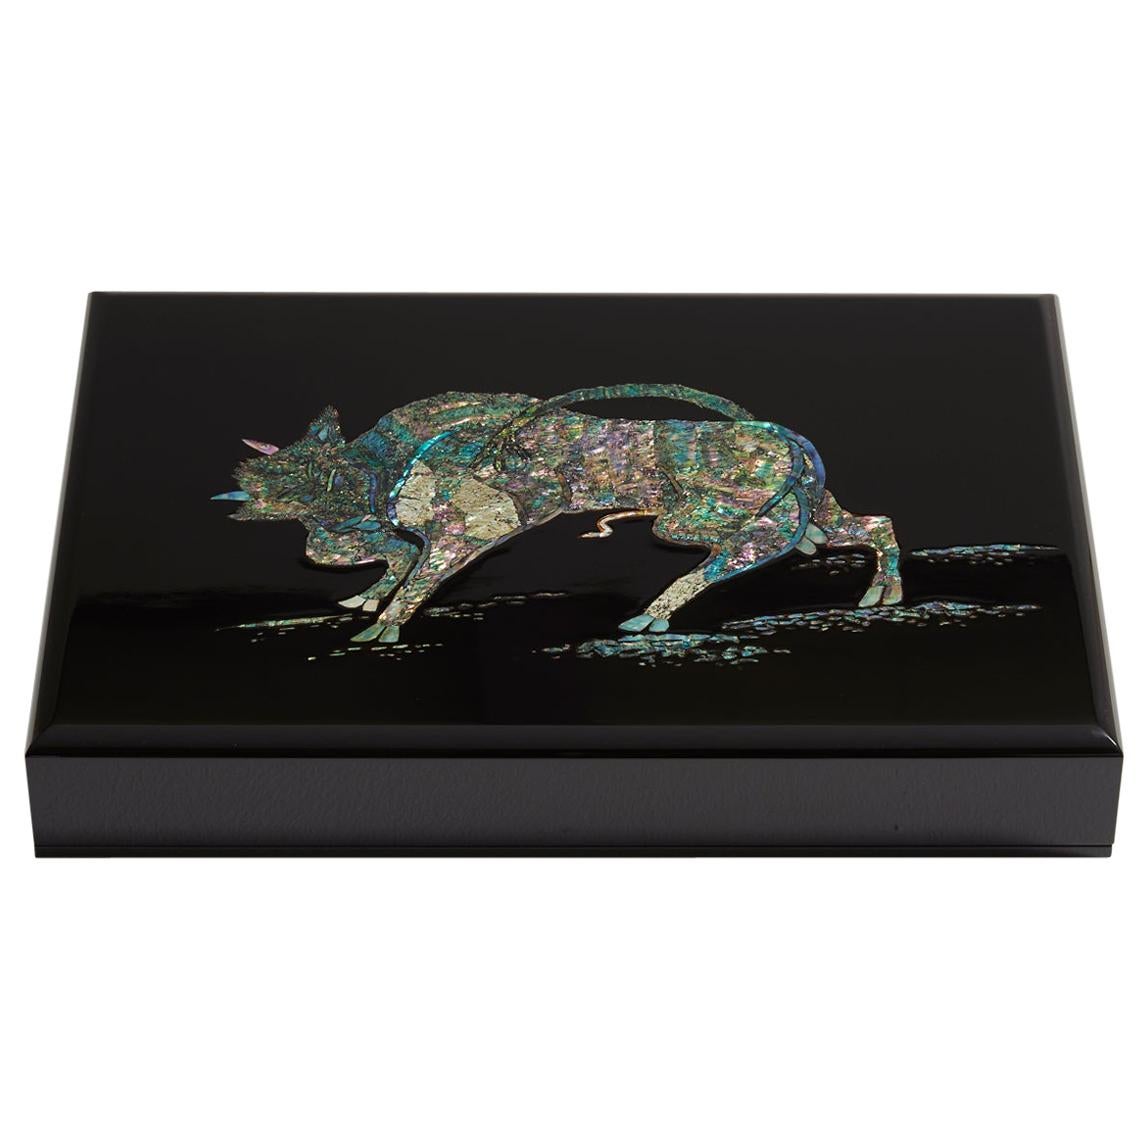 Contemporary Unique Black Document Box with Bull Design by Arijian For Sale